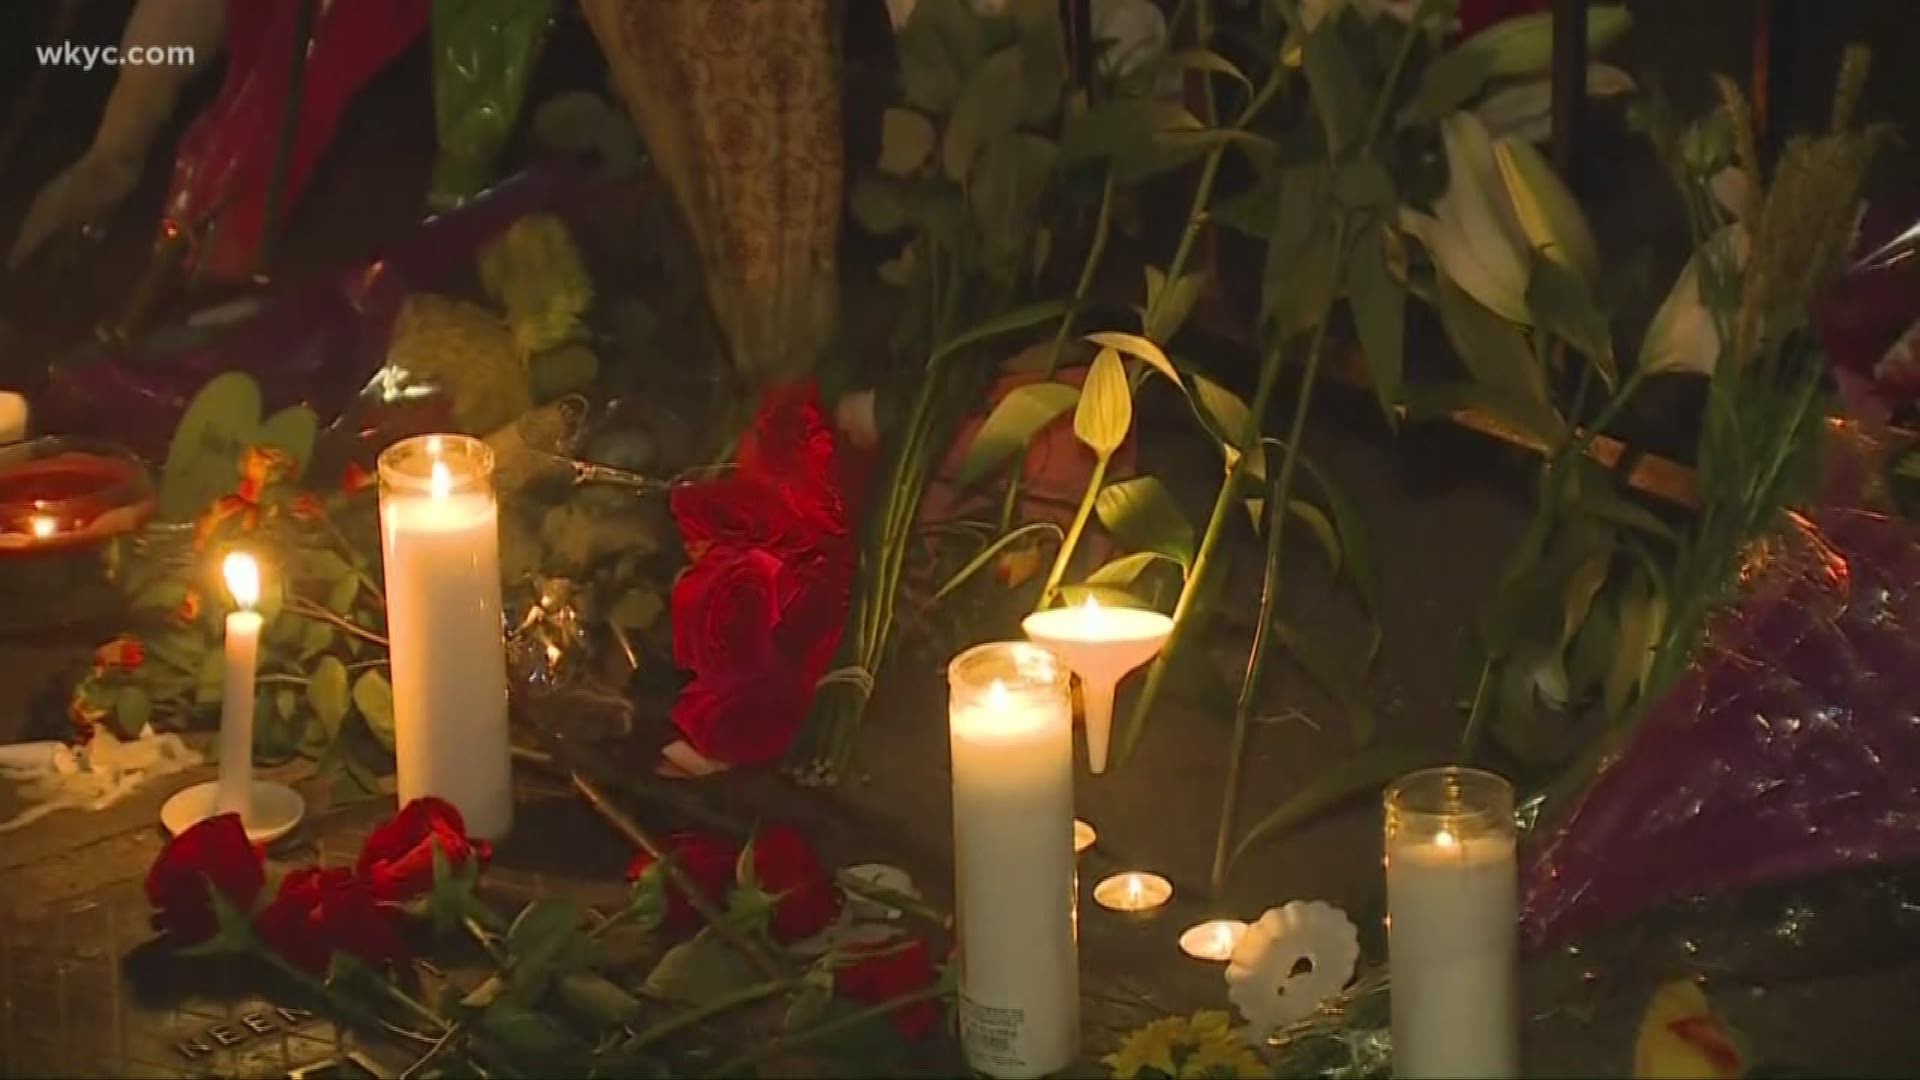 Aug. 5, 2019: The Dayton community is mourning the deaths of nine people in Sunday's mass shooting. WKYC's Jasmine Monroe is in Dayton with the latest.